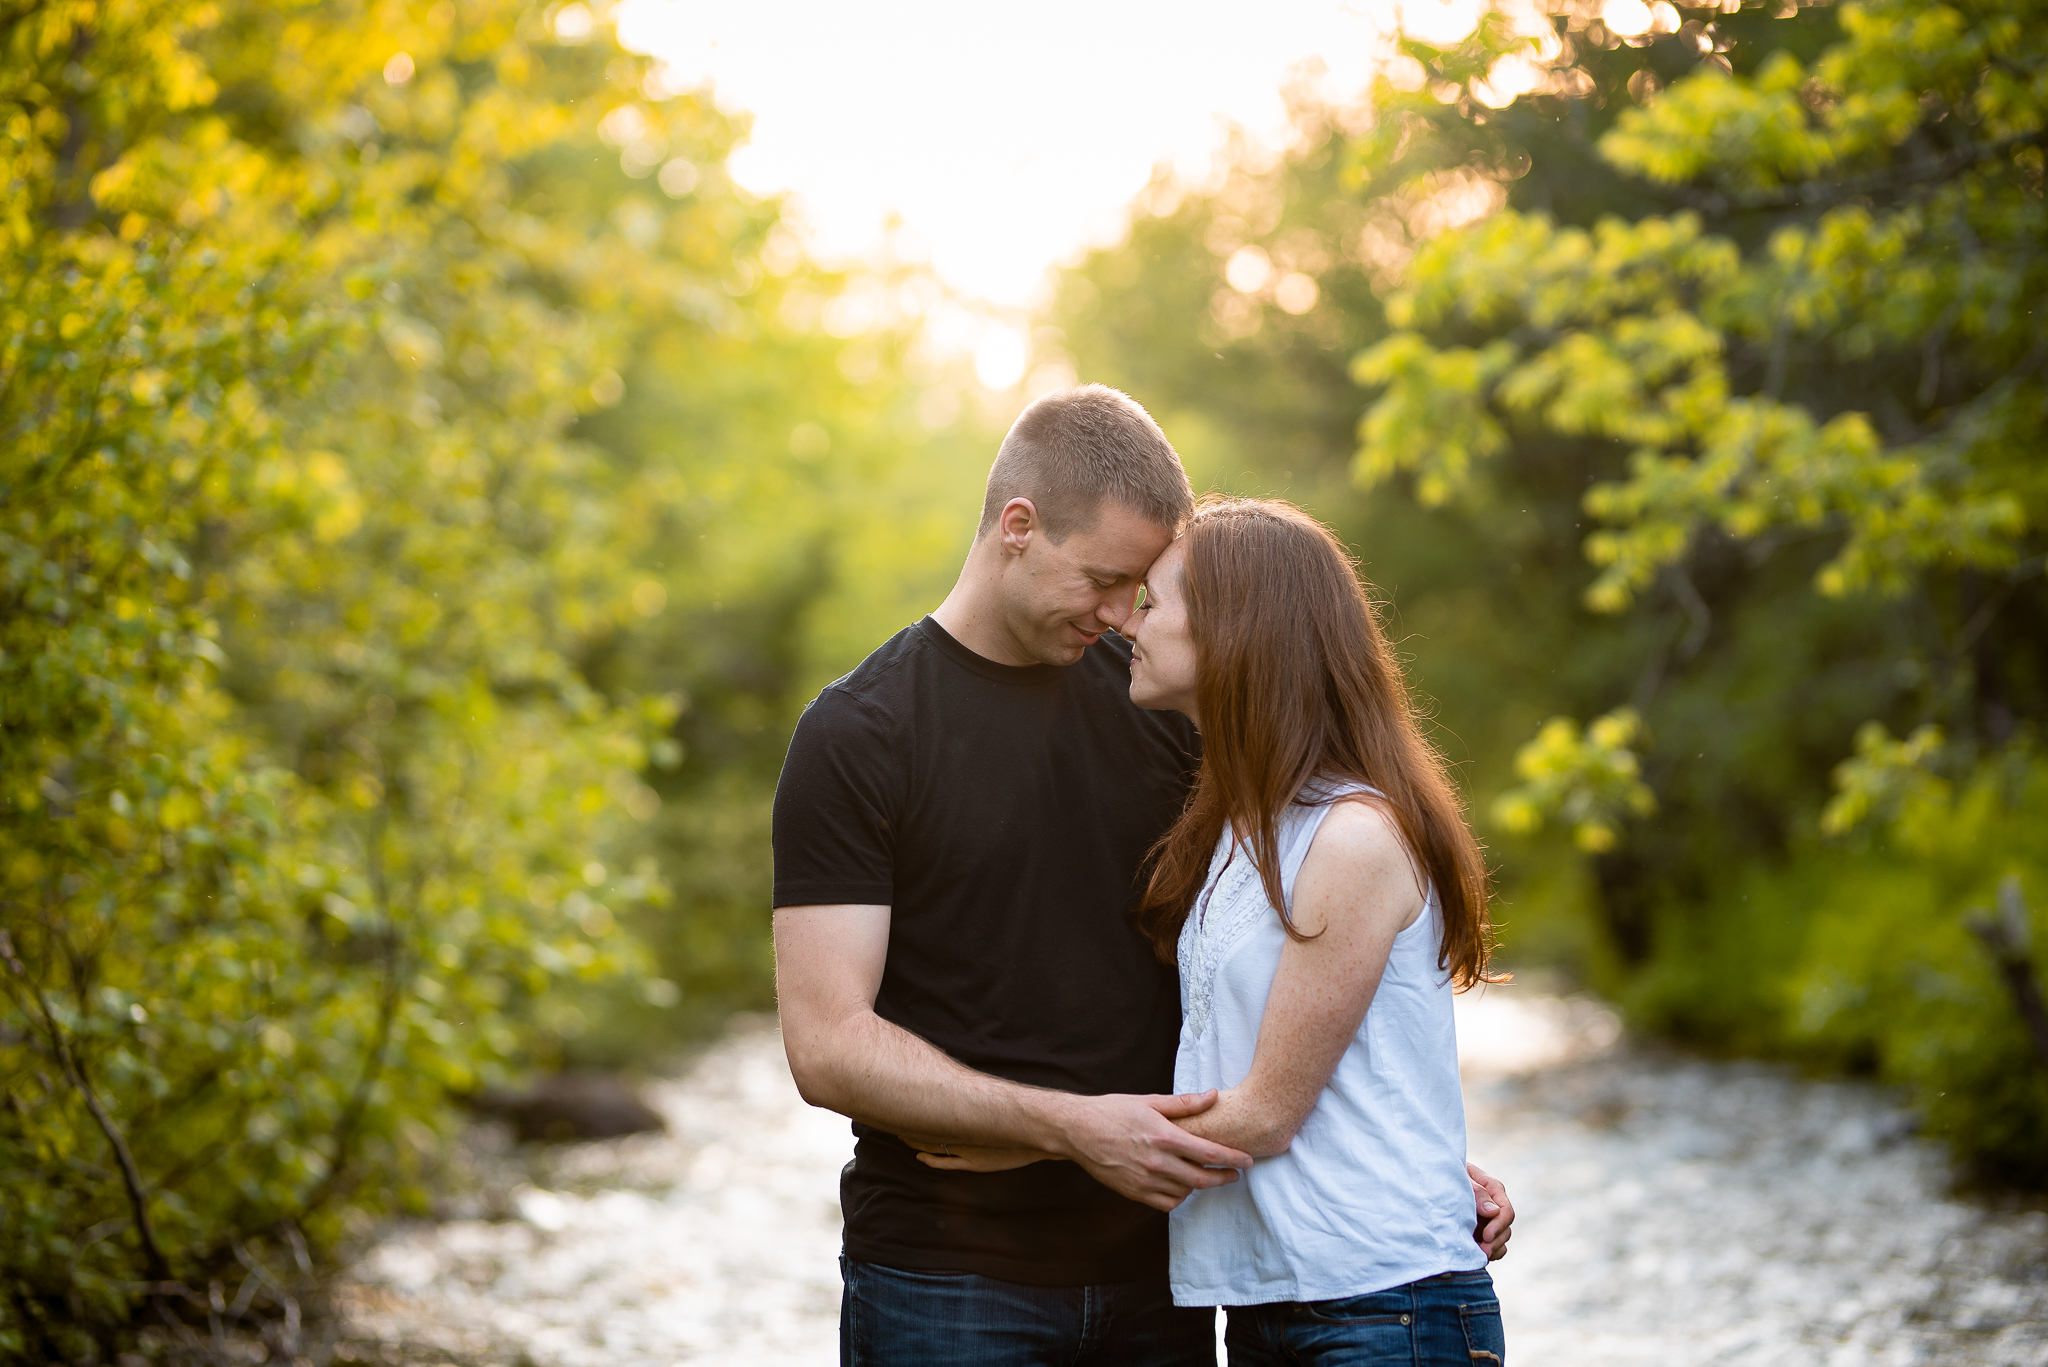 Couples537NaomiLuciennePhotography062019-Edit.jpg